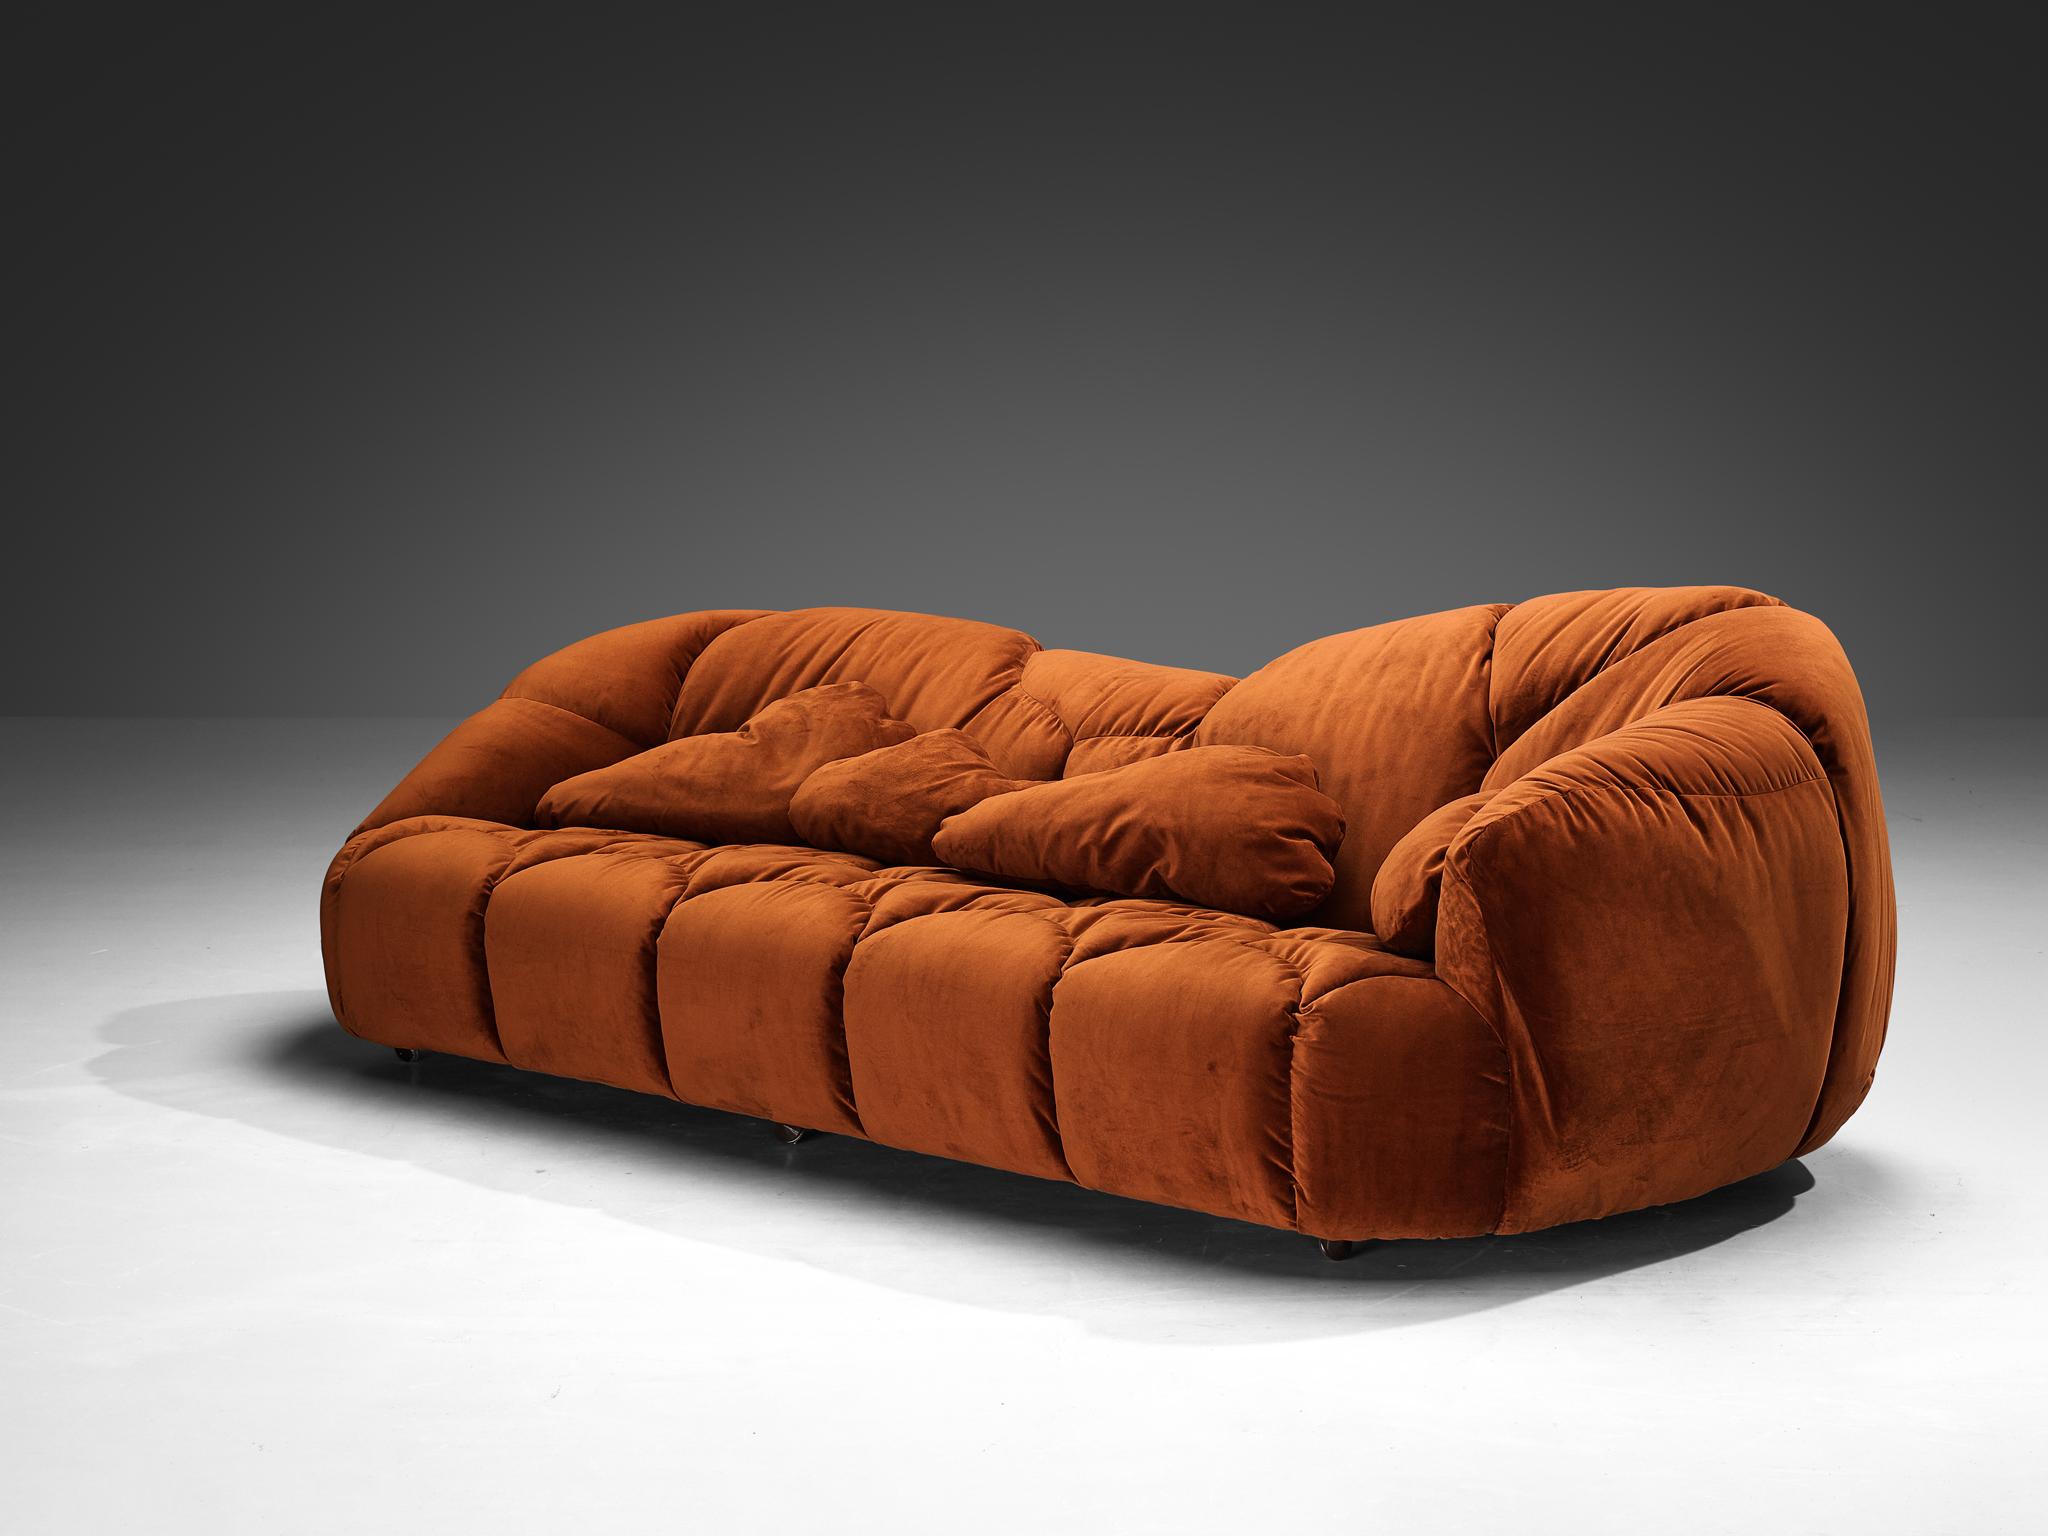 Howard Keith for HK Furniture, 'Cloud' sofa, velvet, United Kingdom, 1970s

The Howard Keith 'Cloud' sofa is a remarkable piece of furniture characterized by its captivating organic forms. With its low seat, sinuous contours, and generously padded